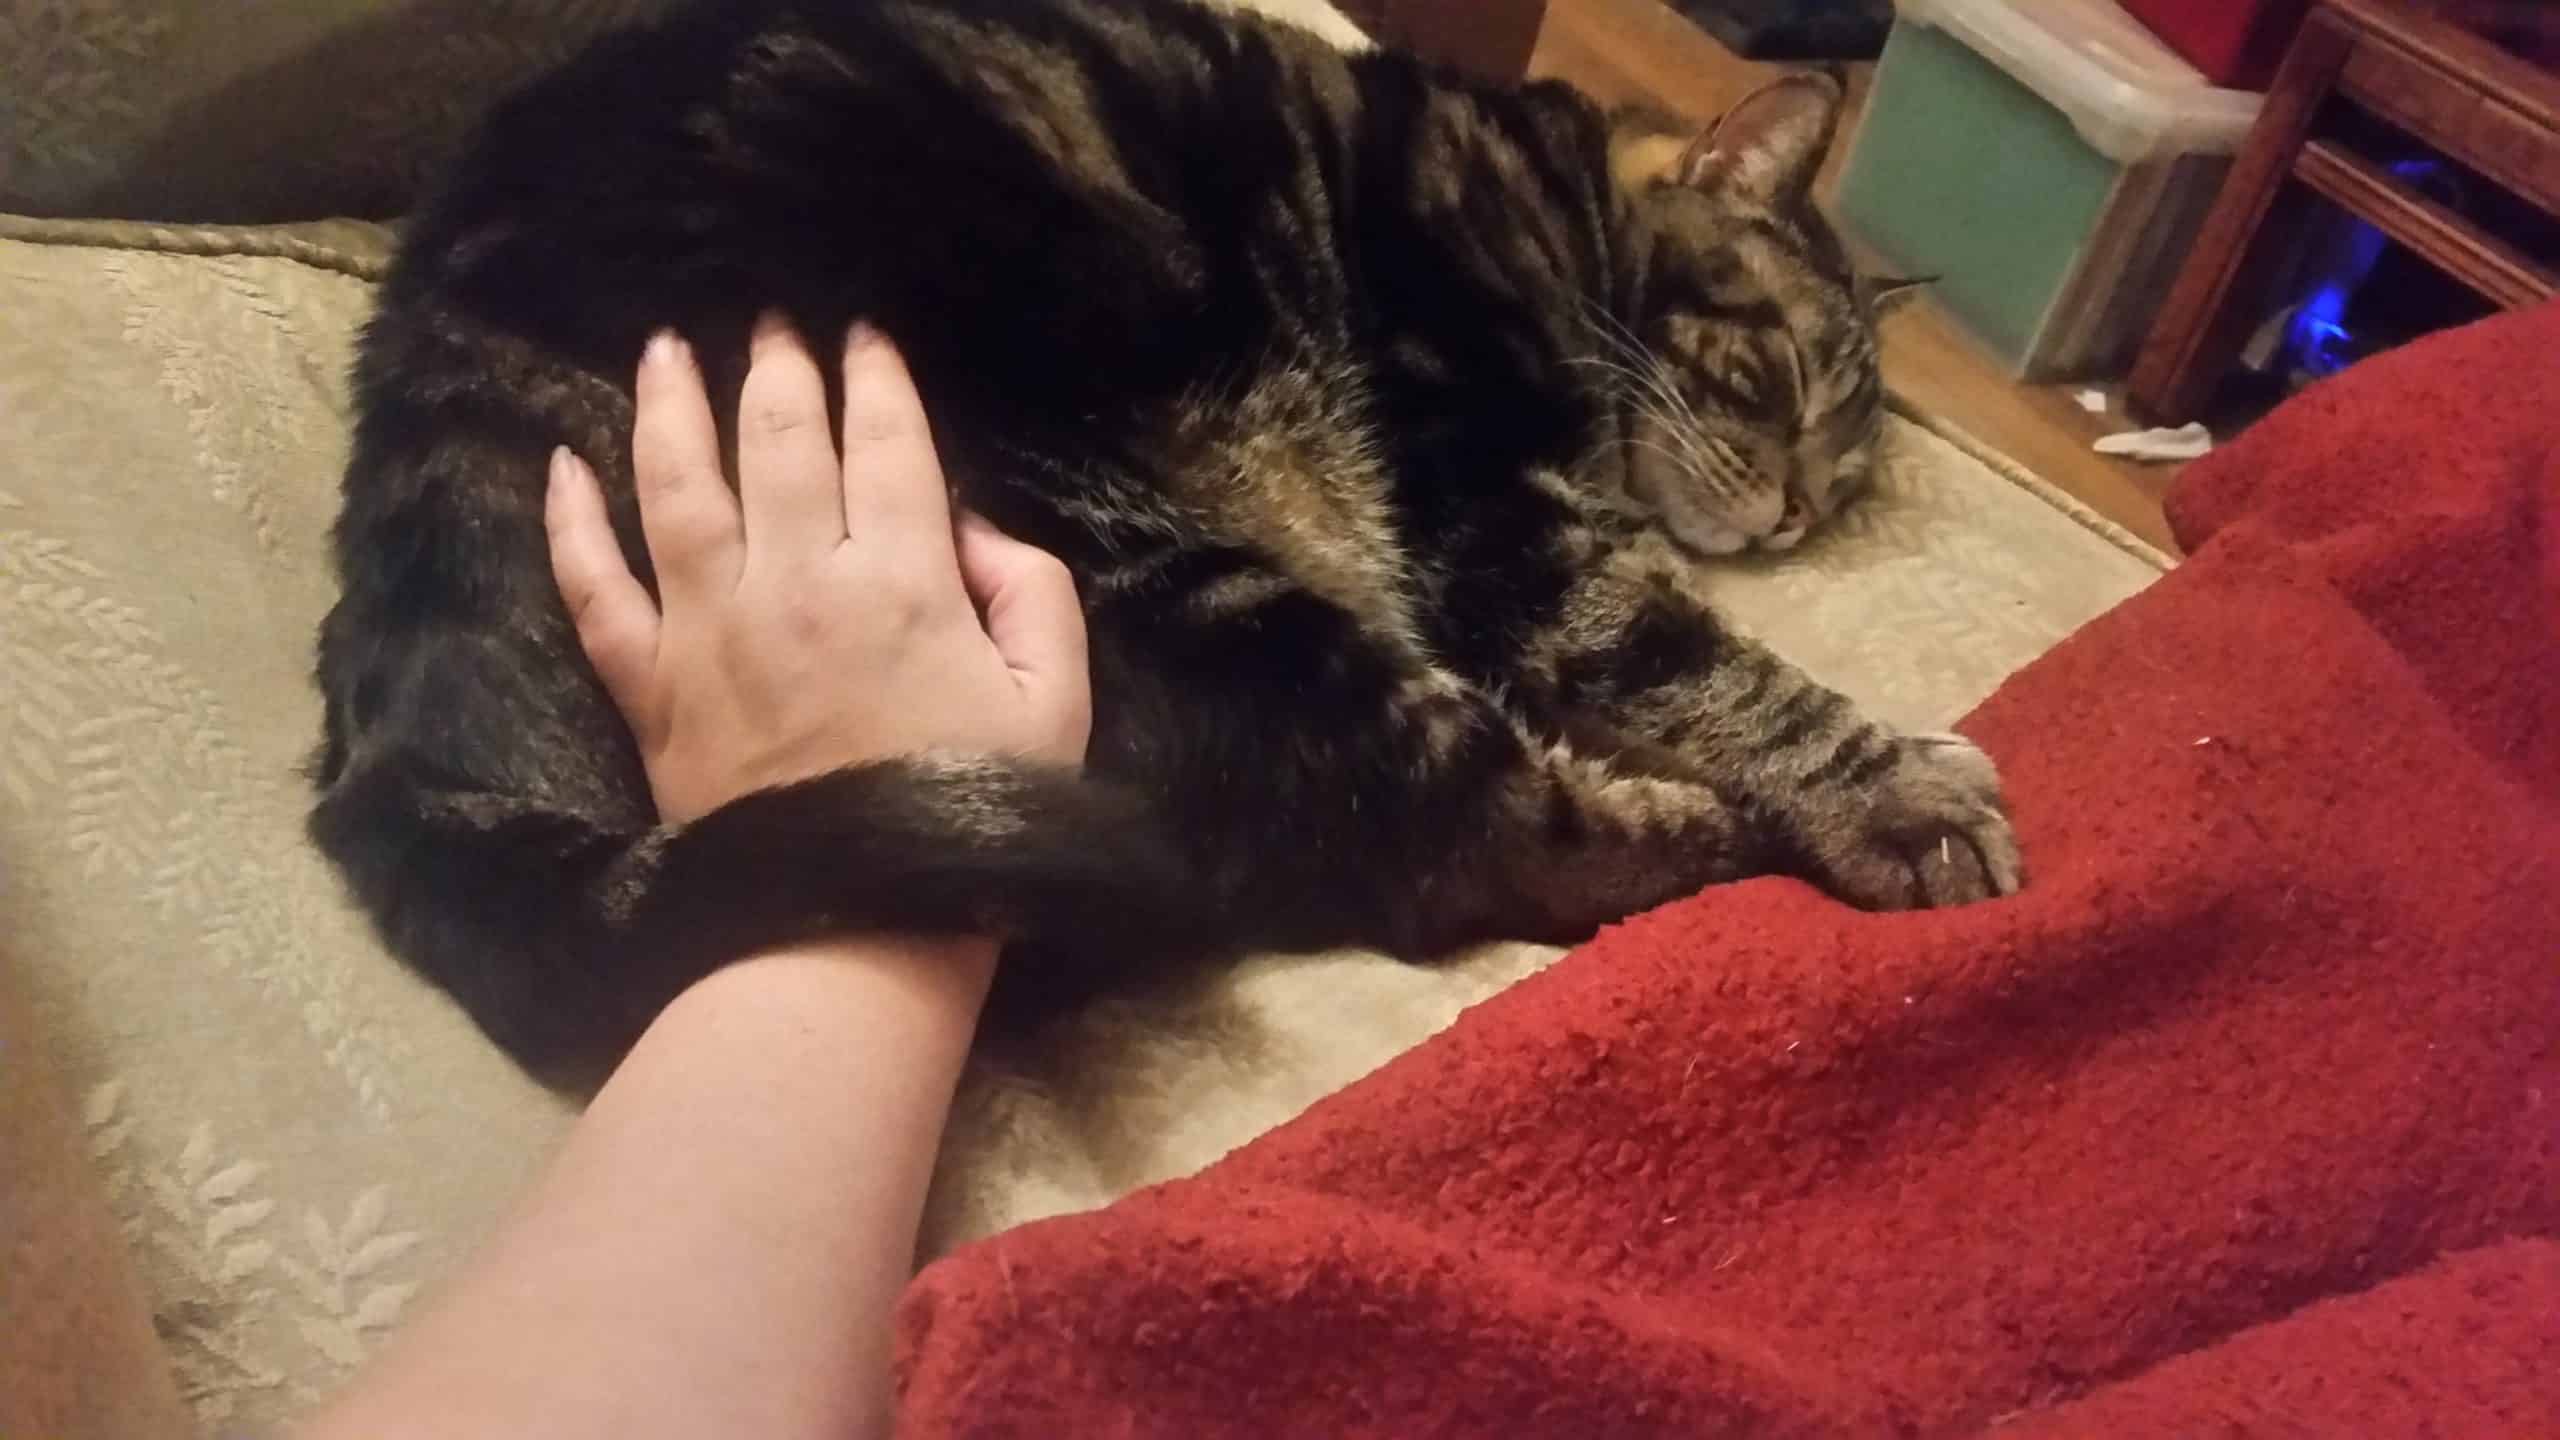 The picture is taken looking down at my arm and hand. Nigel is on the couch beside me, his paws touching the blanket I'm under. His tail is firmly wrapped around my wrist.